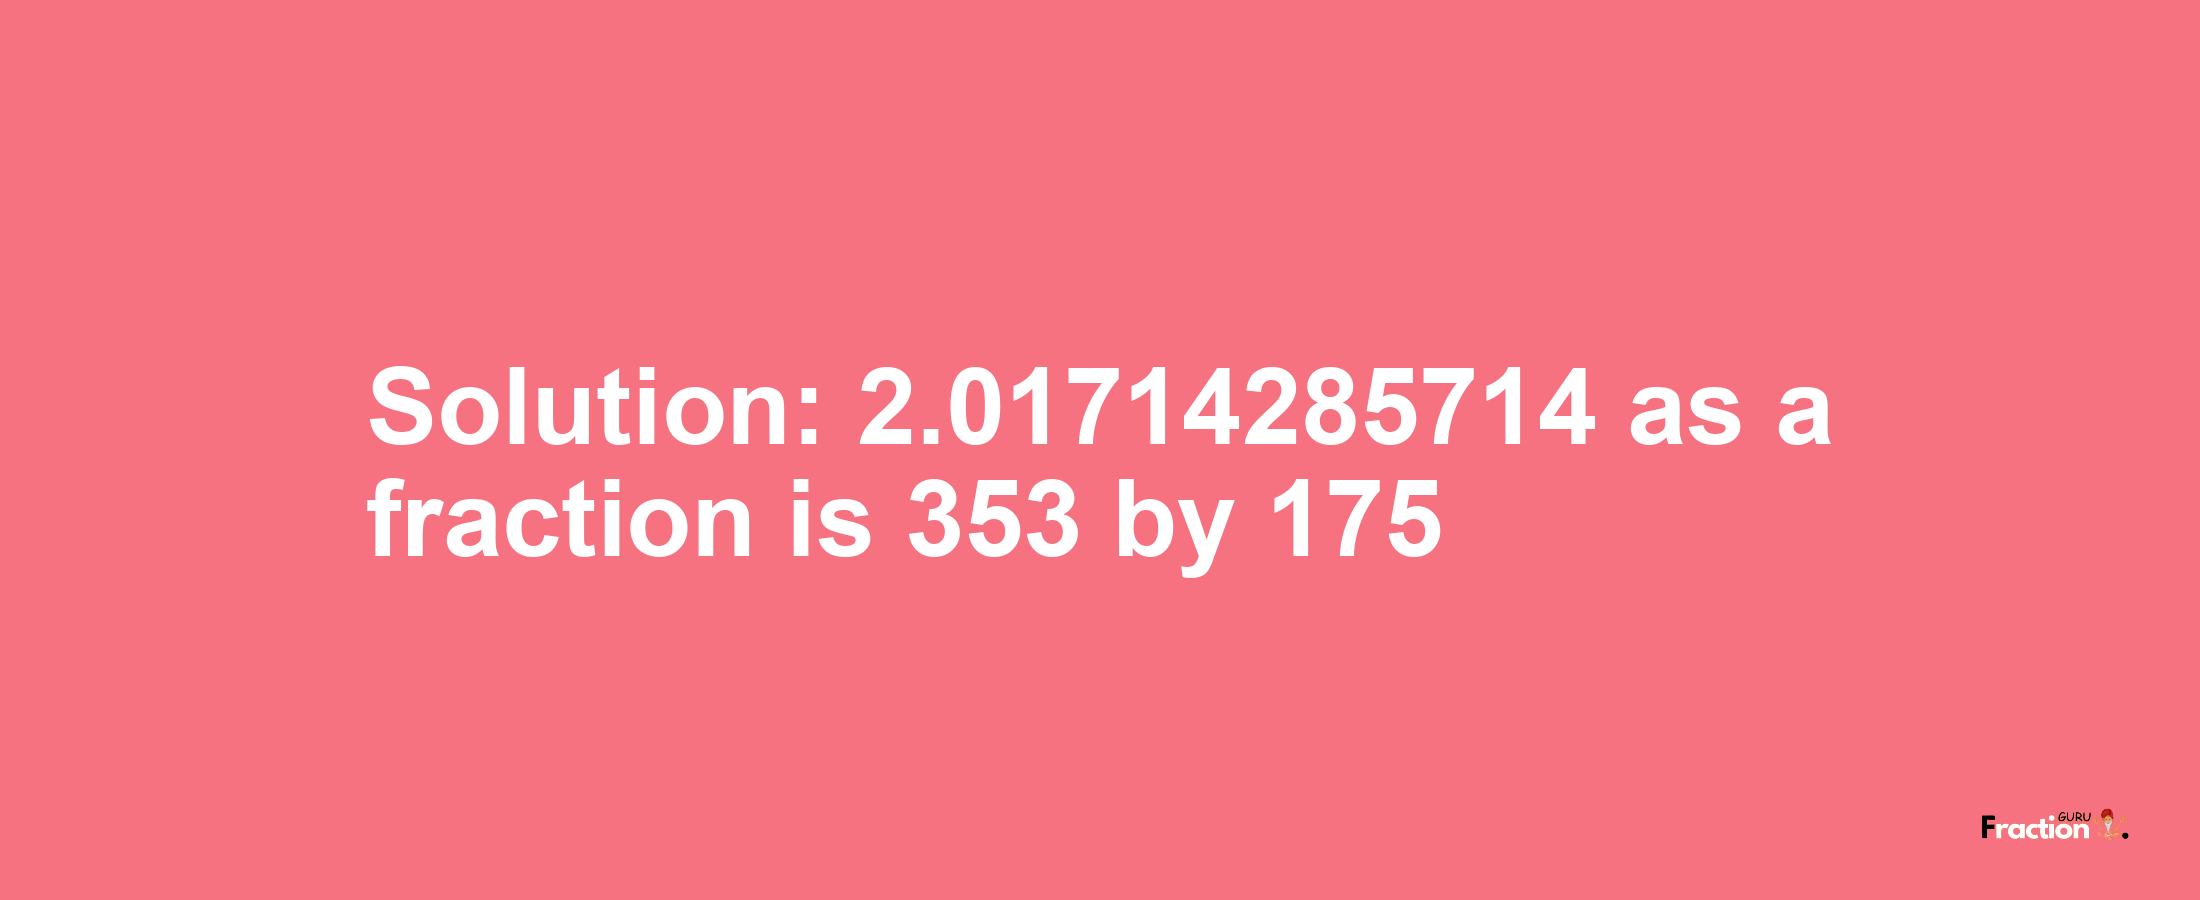 Solution:2.01714285714 as a fraction is 353/175